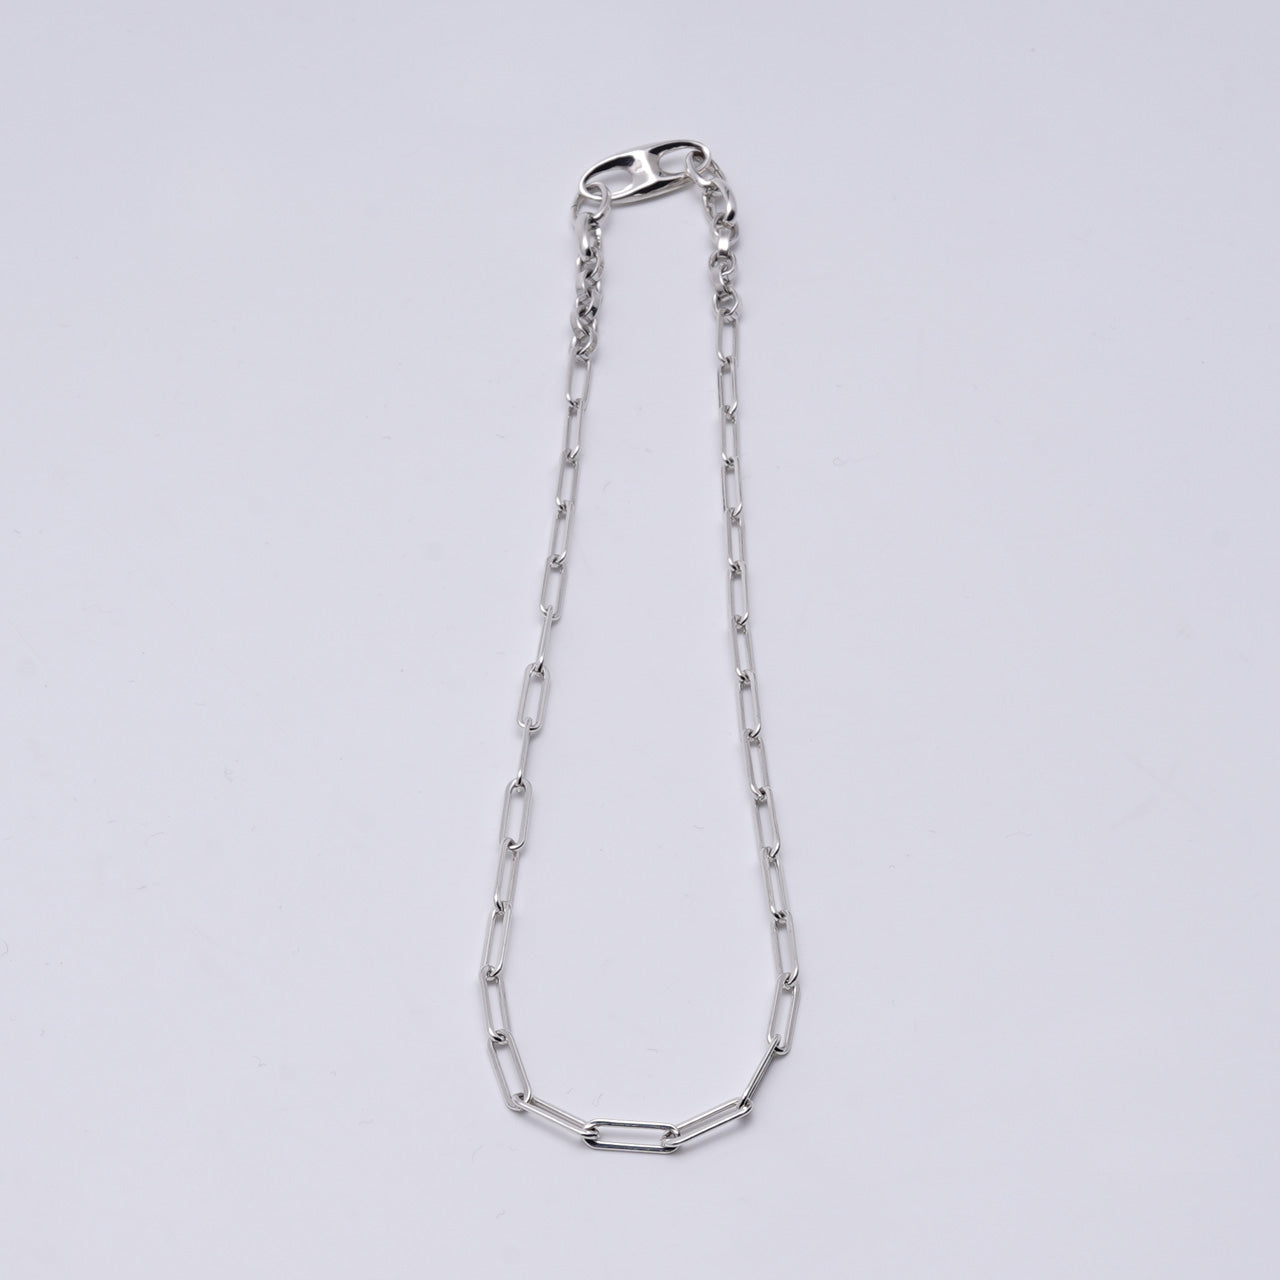 Garden of Eden ガーデンオブエデン チェーン ネックレス アンカー PC CHAIN NECKLACE ANCHOR 50cm 【送料無料】